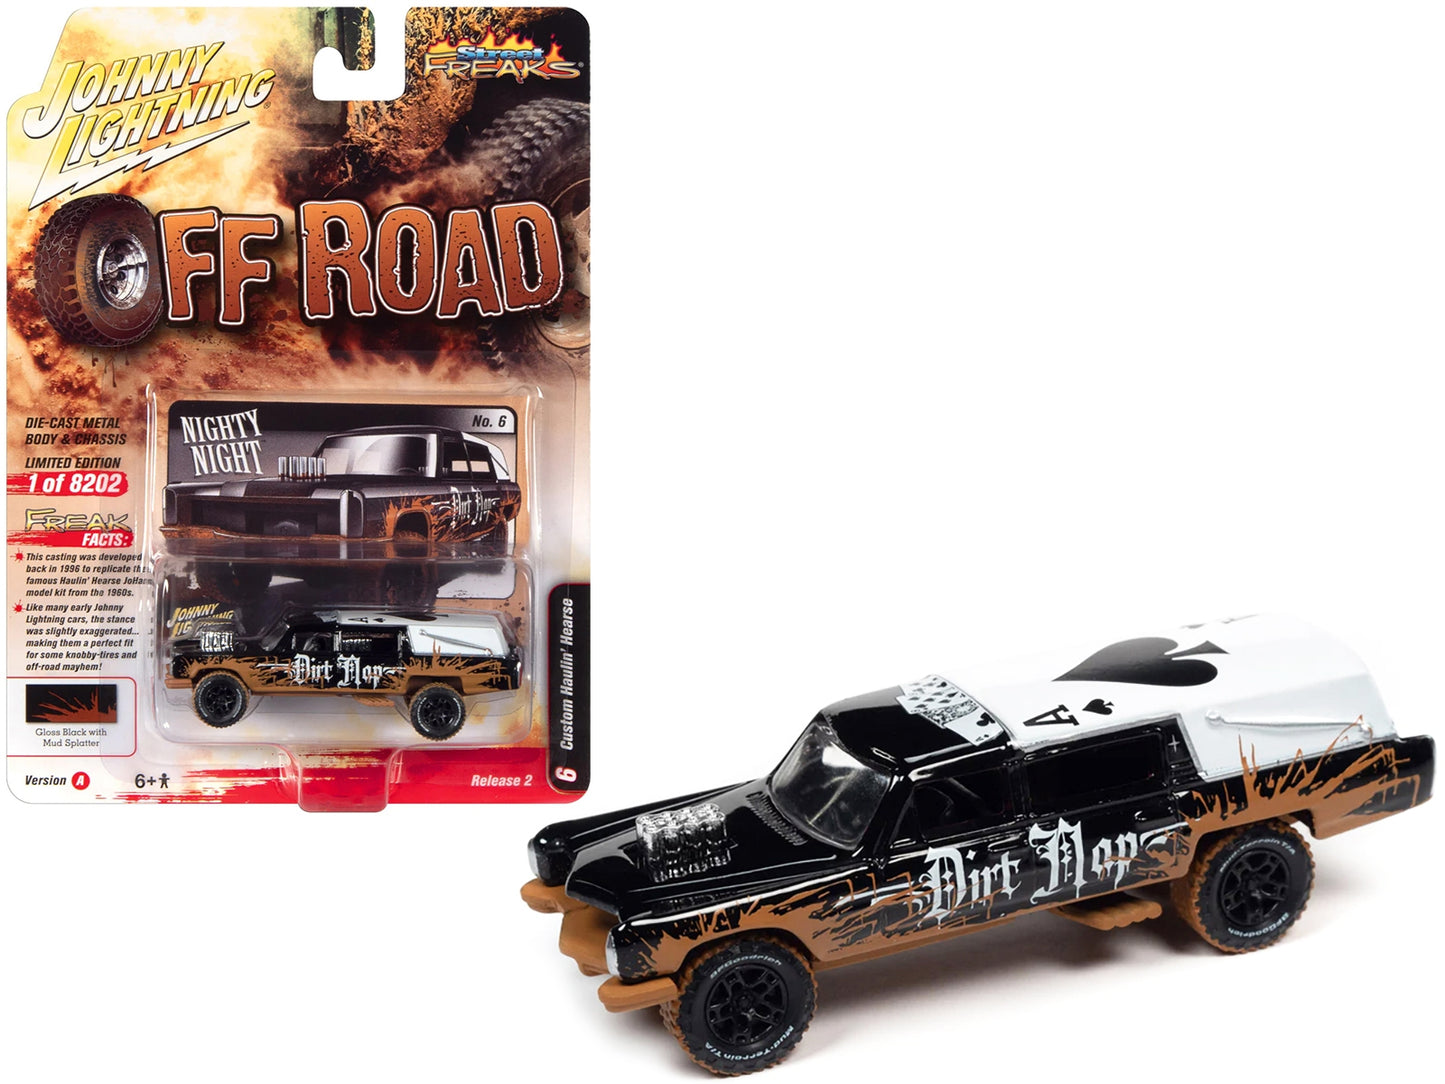 Haulin' Hearse Custom Black with Mud Graphics "Dirt Mop" "Off Road" Series Limited Edition to 8202 pieces Worldwide 1/64 Diecast Model Car by Johnny Lightning